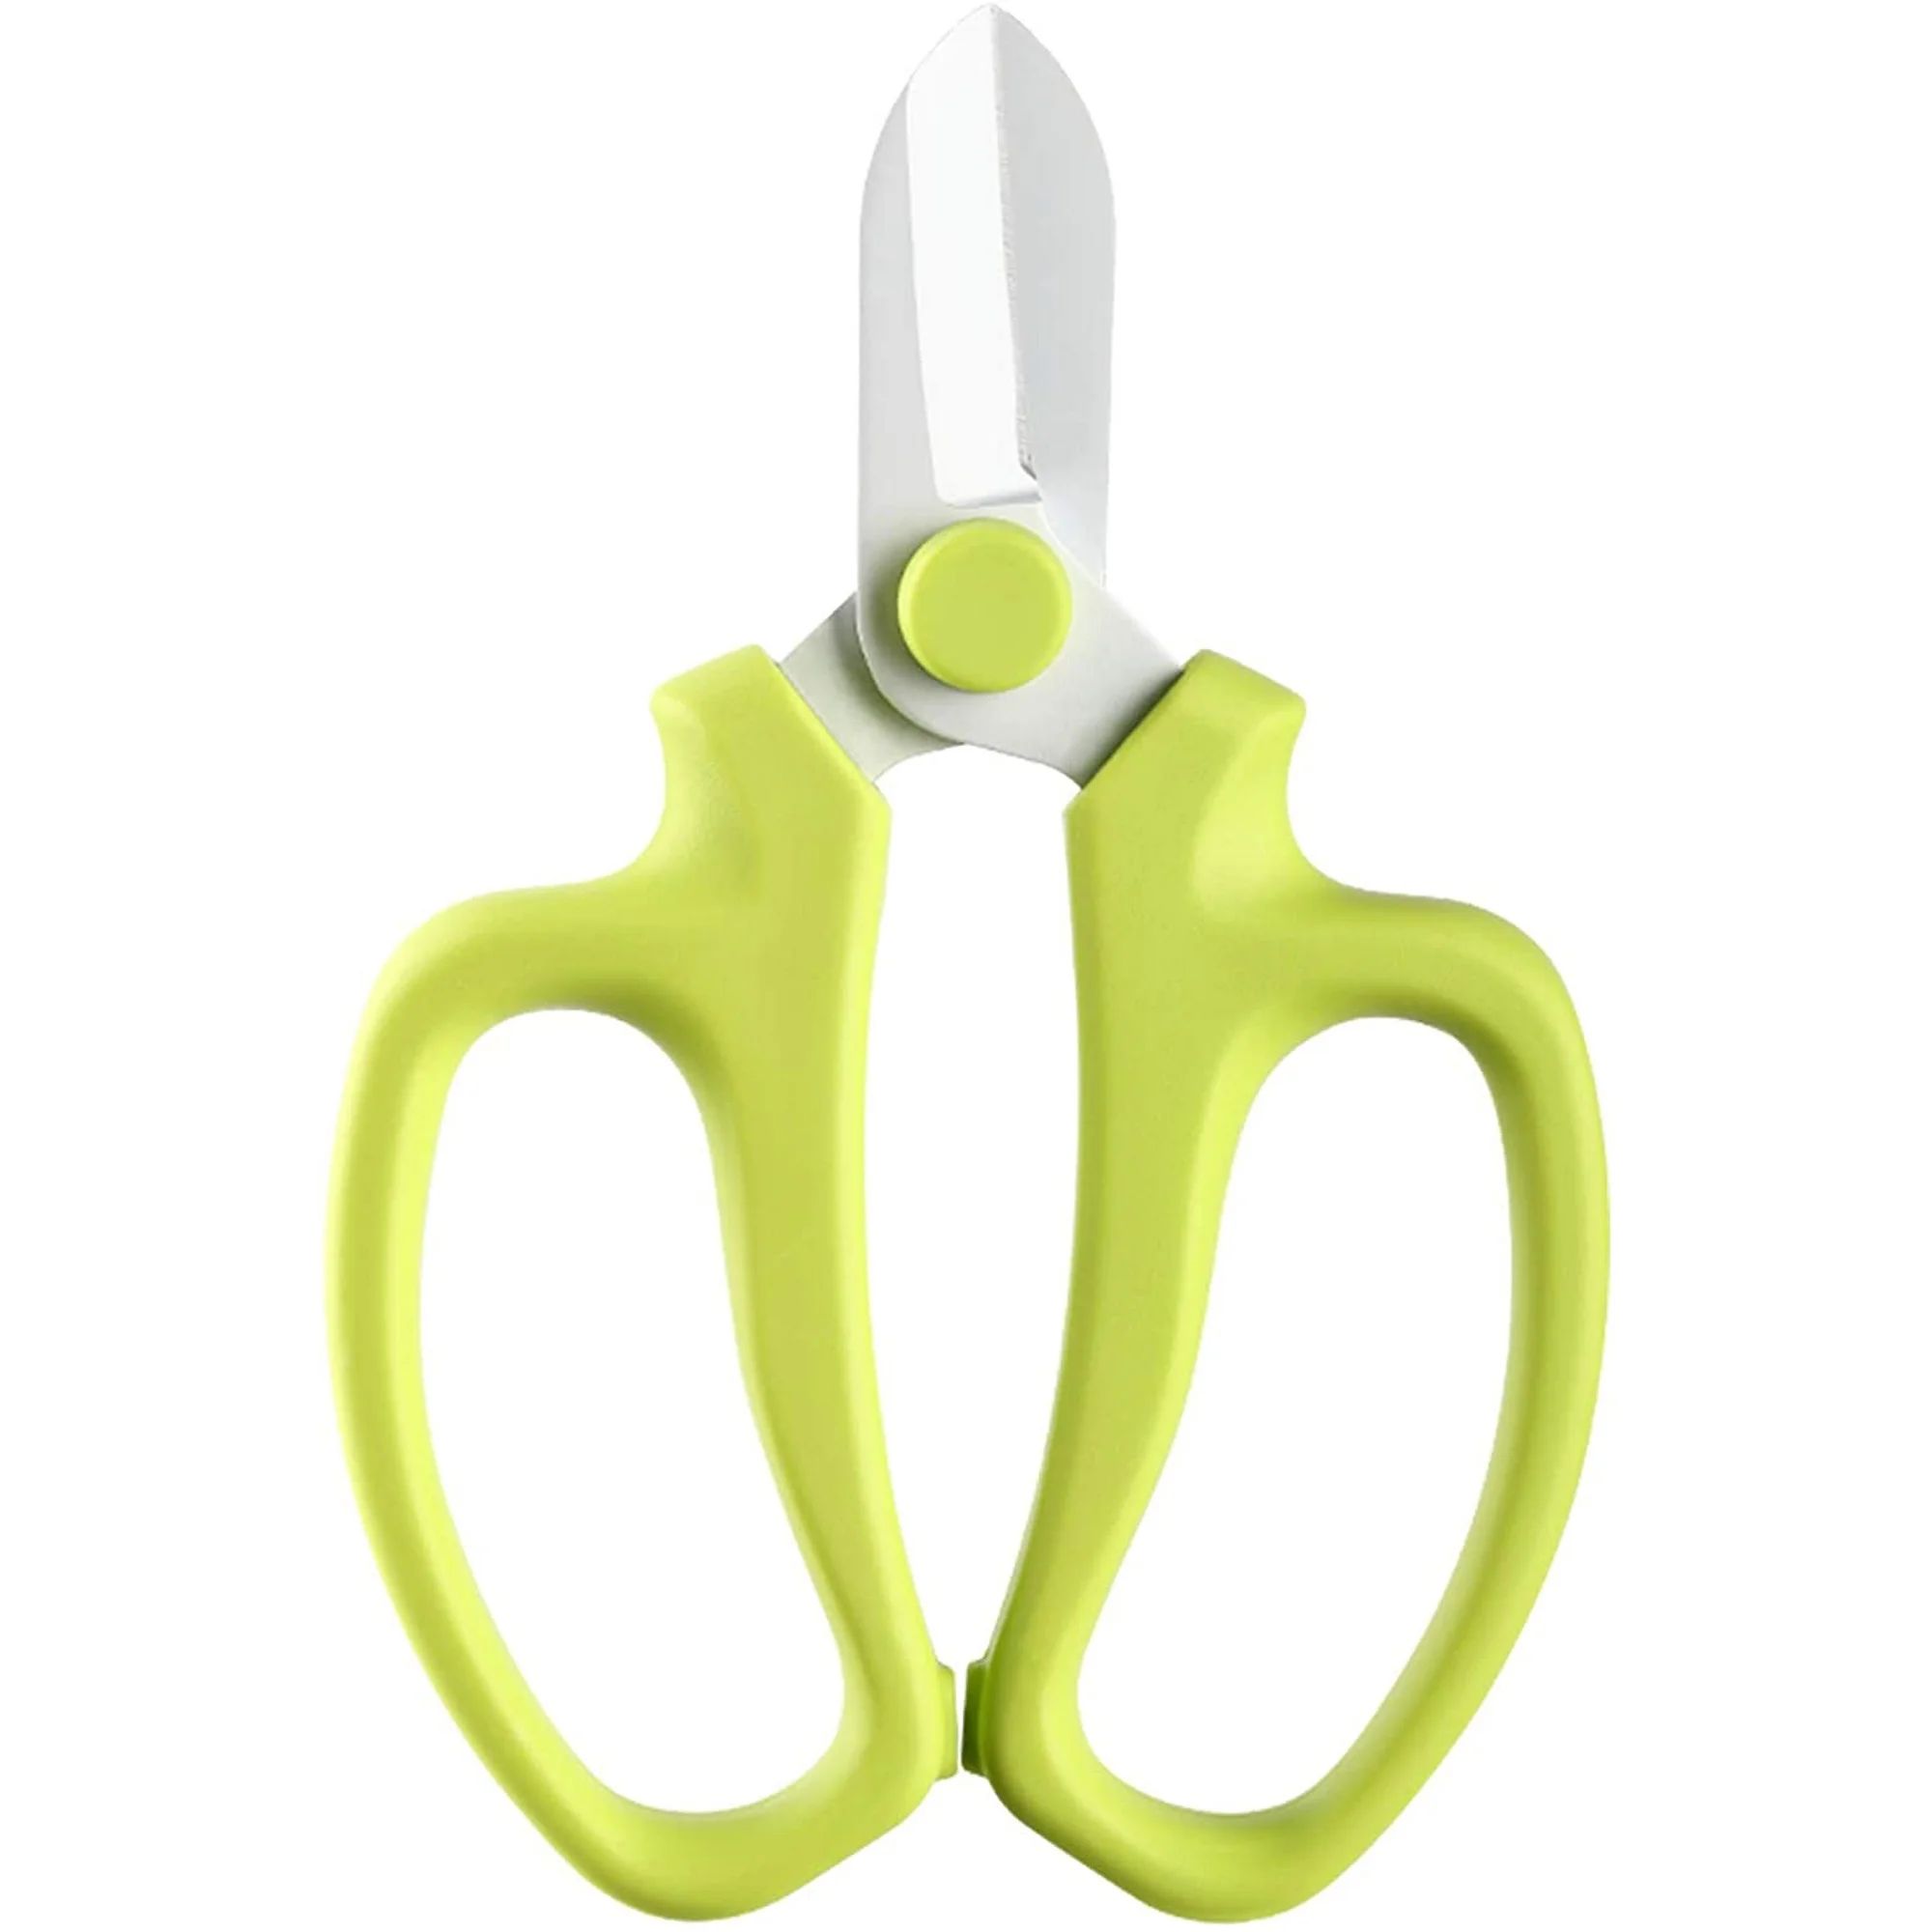 Floral Shears,Professional Flower Scissors,Garden Shears with Comfortable Grip Handle,Pruning She... | Walmart (US)